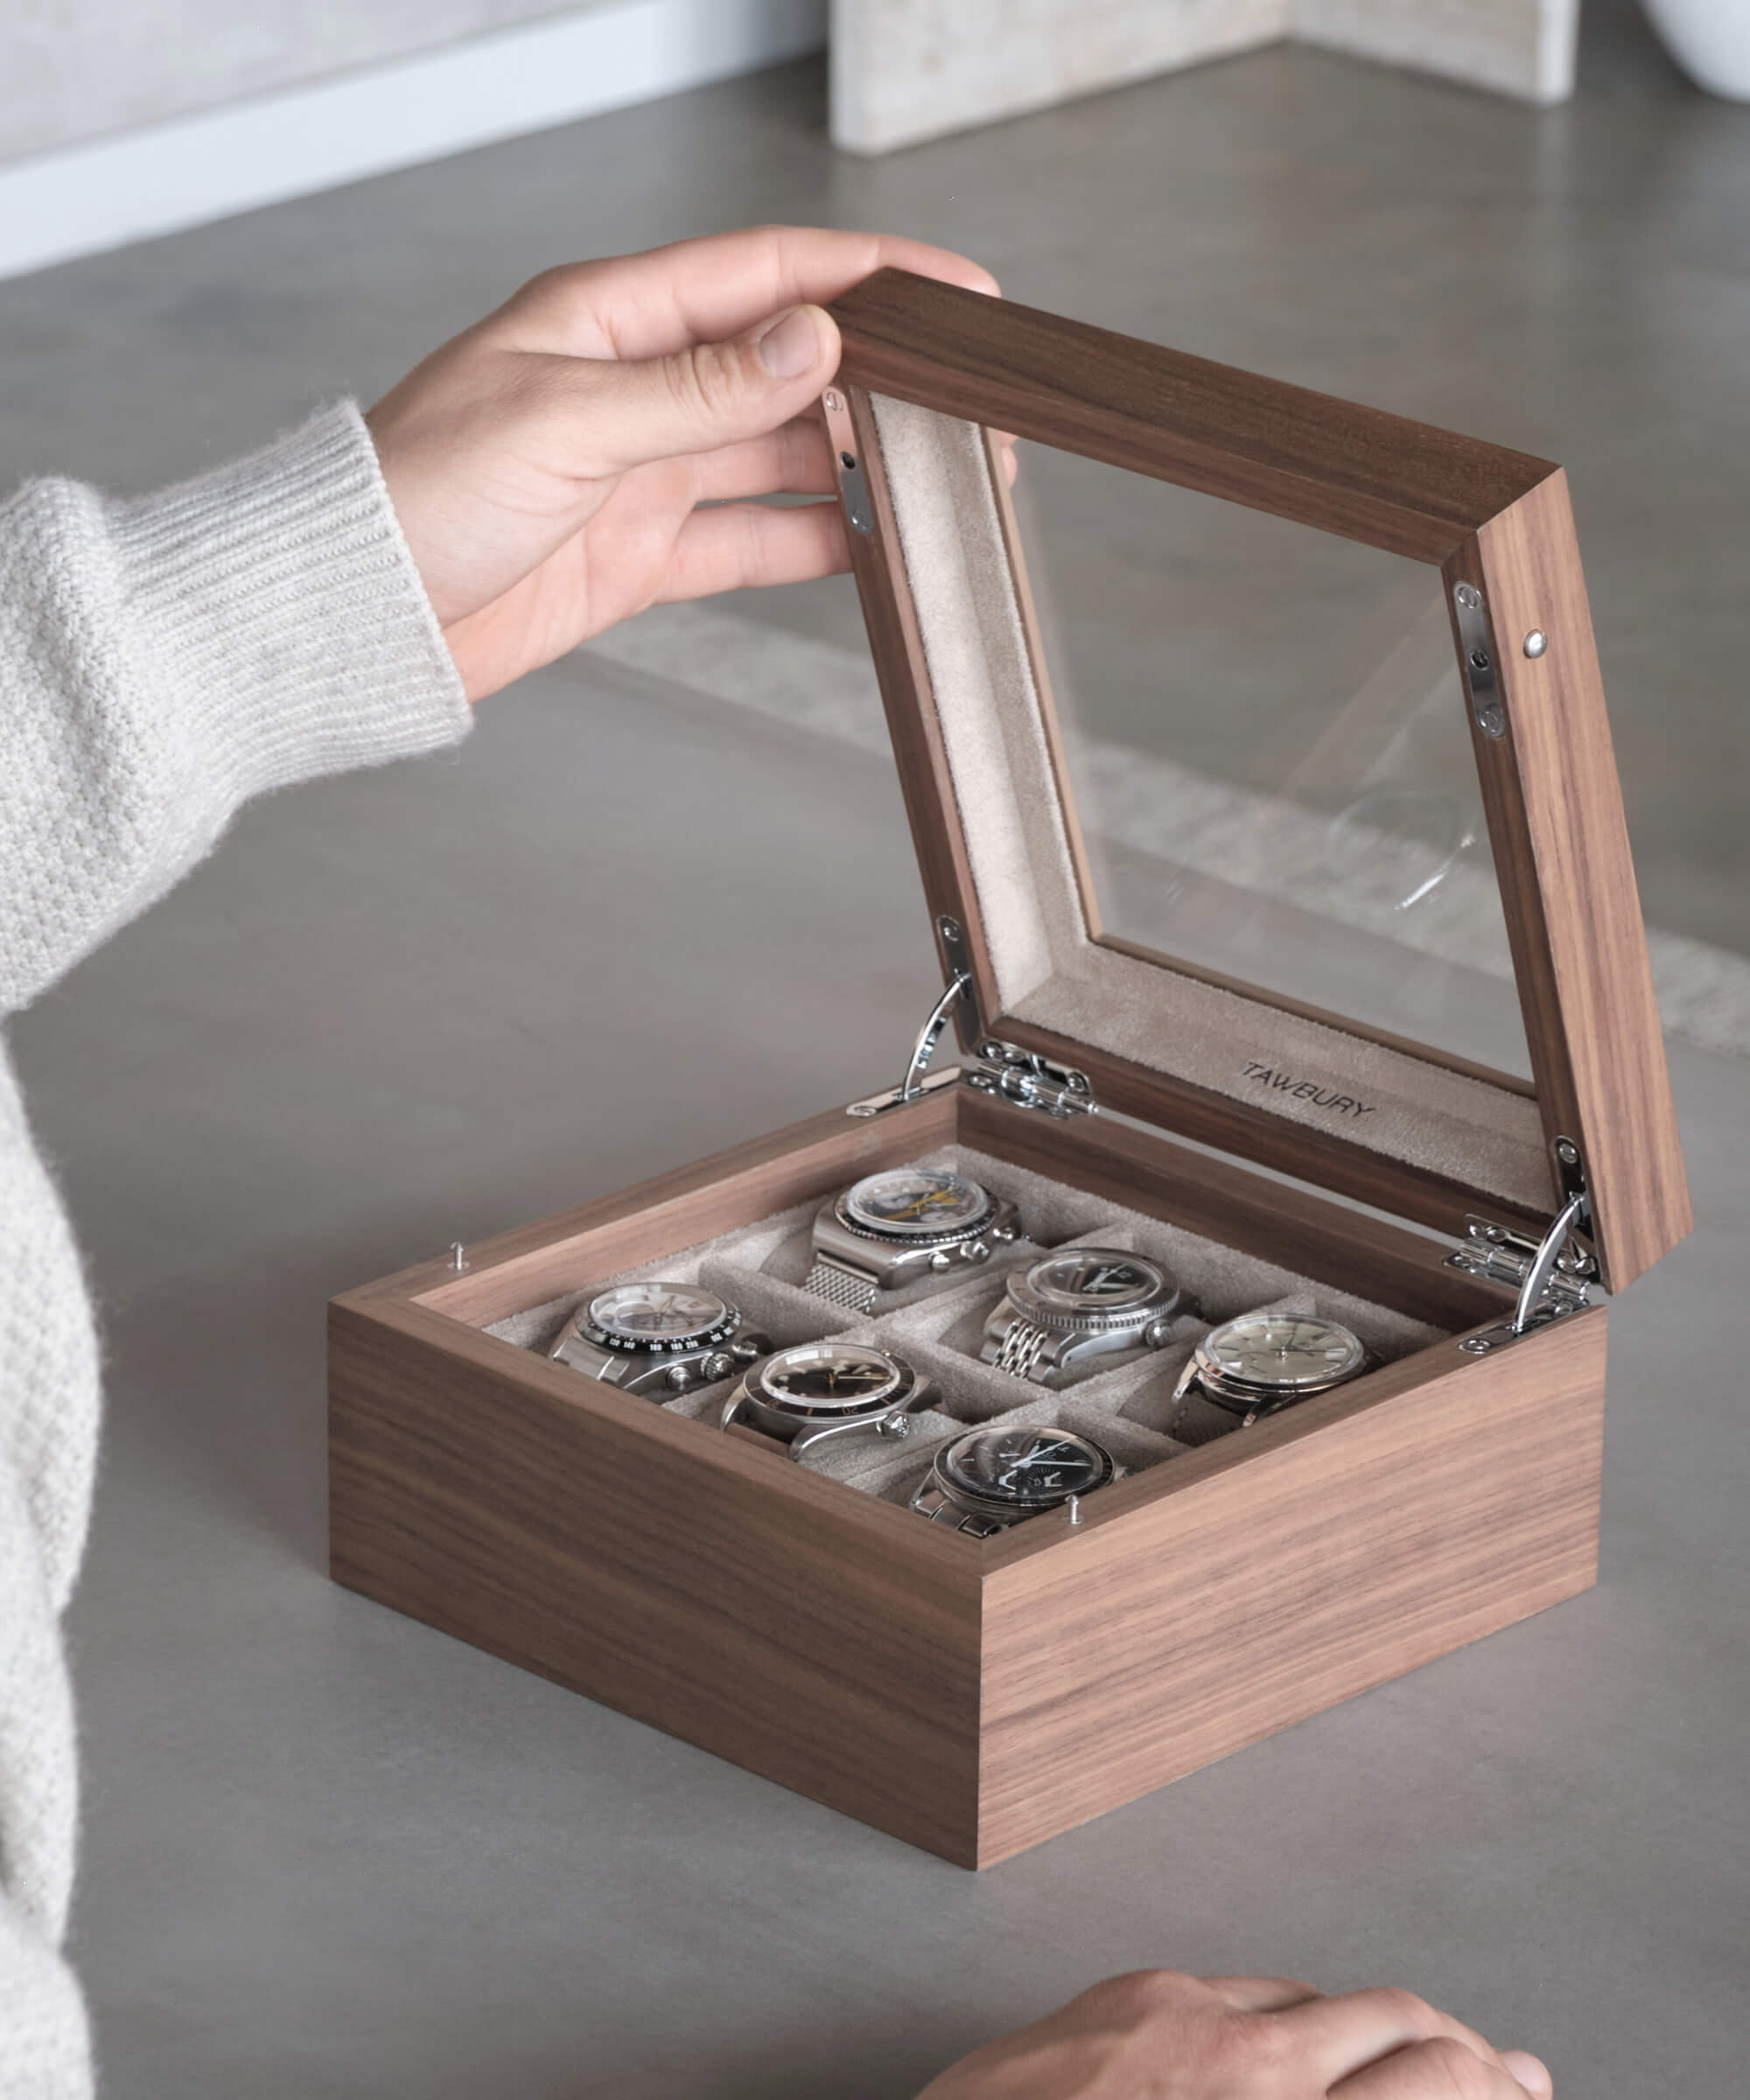 A person is opening a TAWBURY Grove 6 Slot Watch Box with Glass Lid - Walnut containing their cherished timepieces.